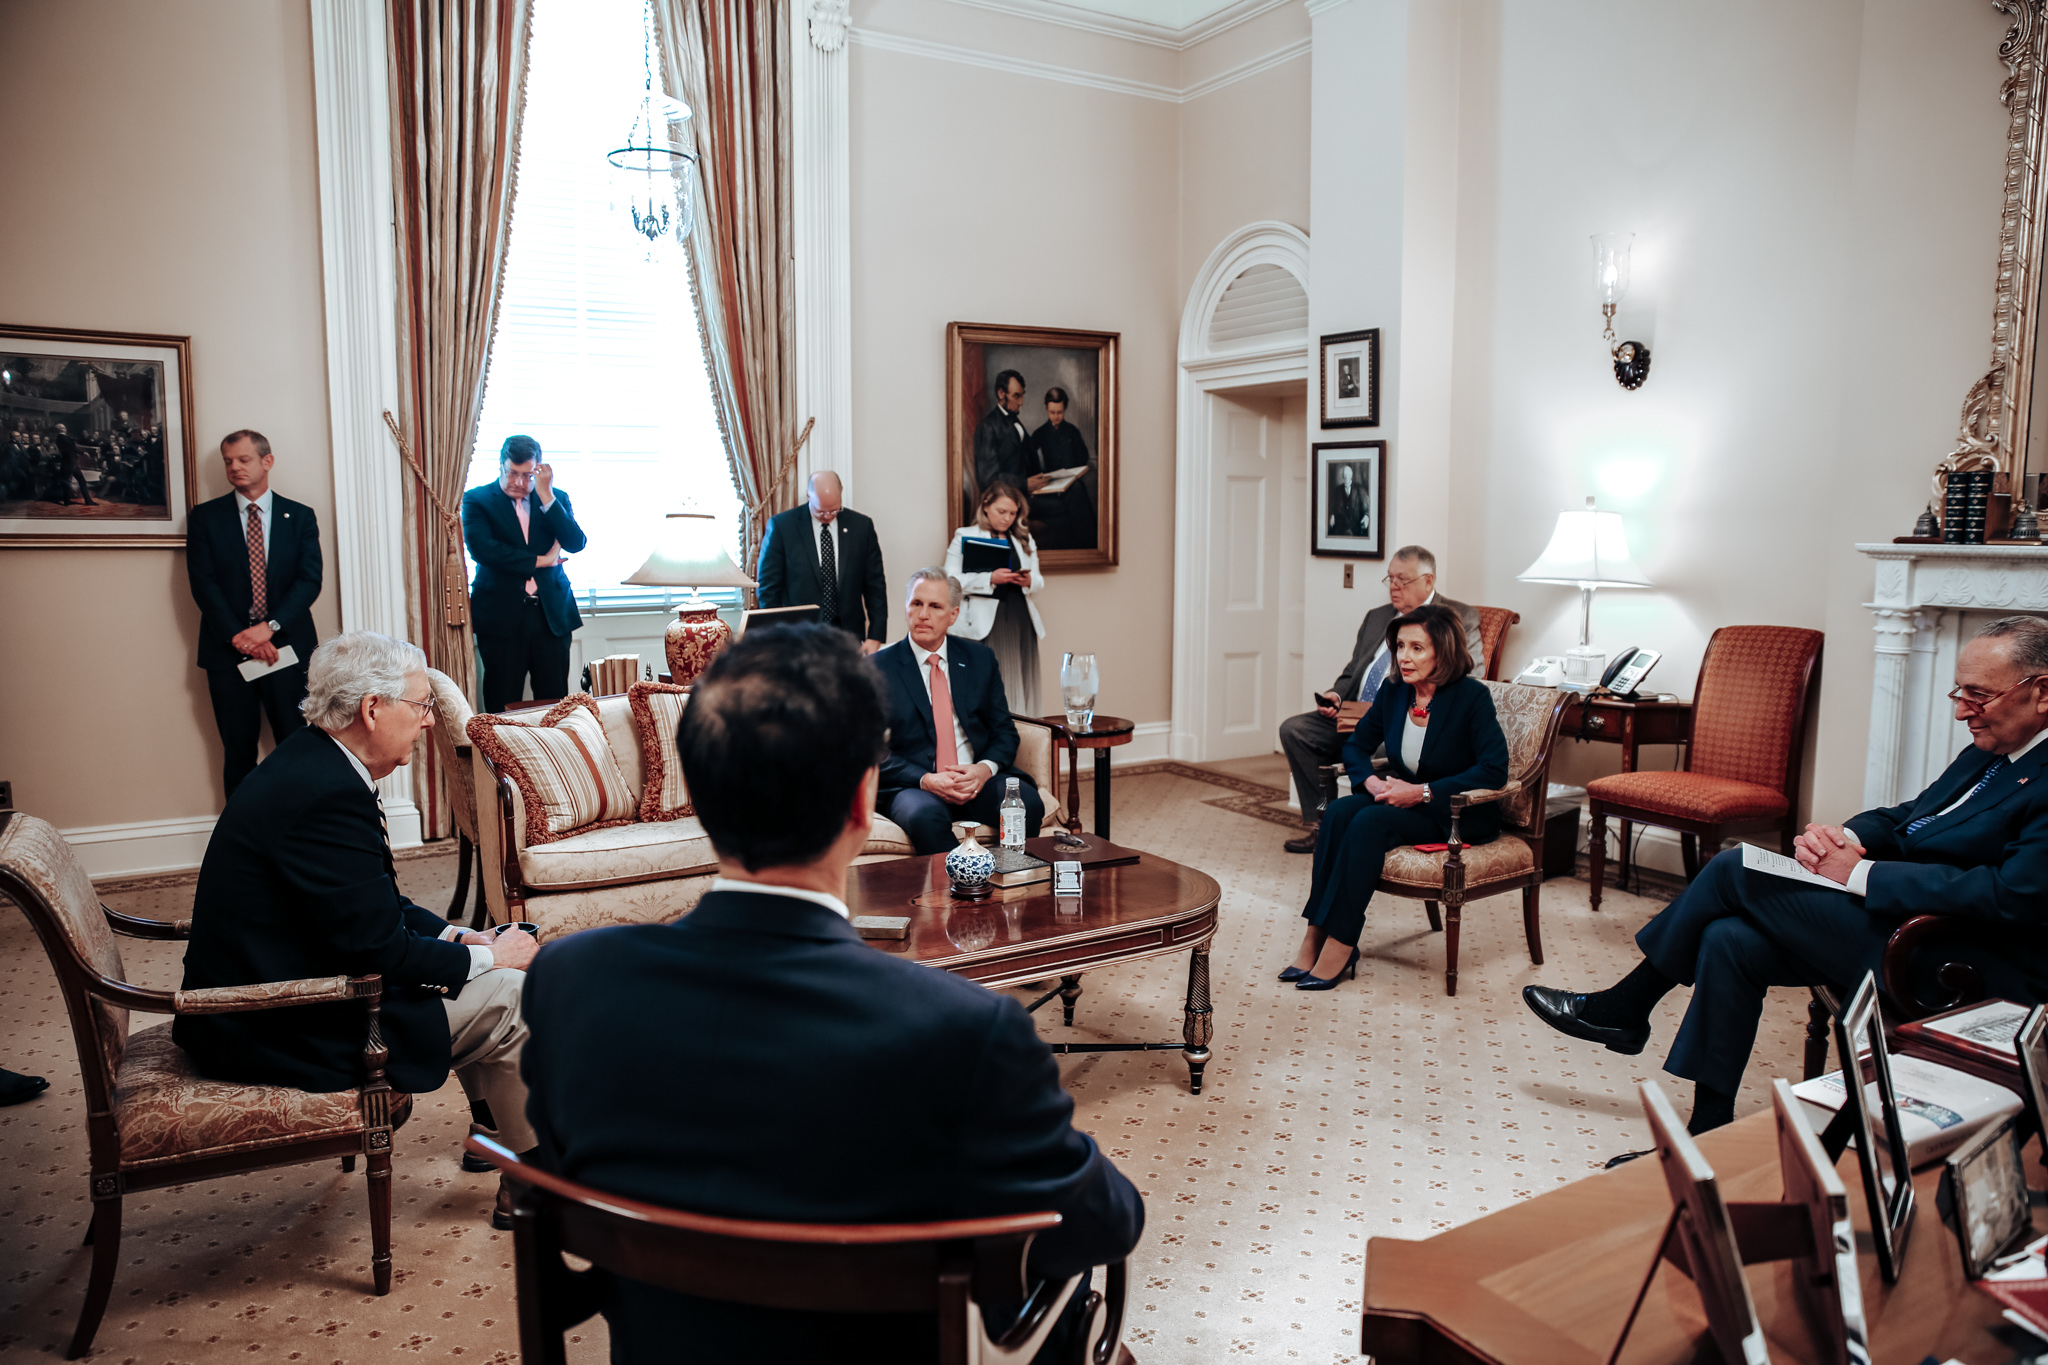 PHOTO: Senate Majority Leader Mitch McConnell hosted Speaker of the House Nancy Pelosi in his office to discuss the Coronavirus Aid, Relief, and Economic Security (CARES) Act, March 22, 2020. 